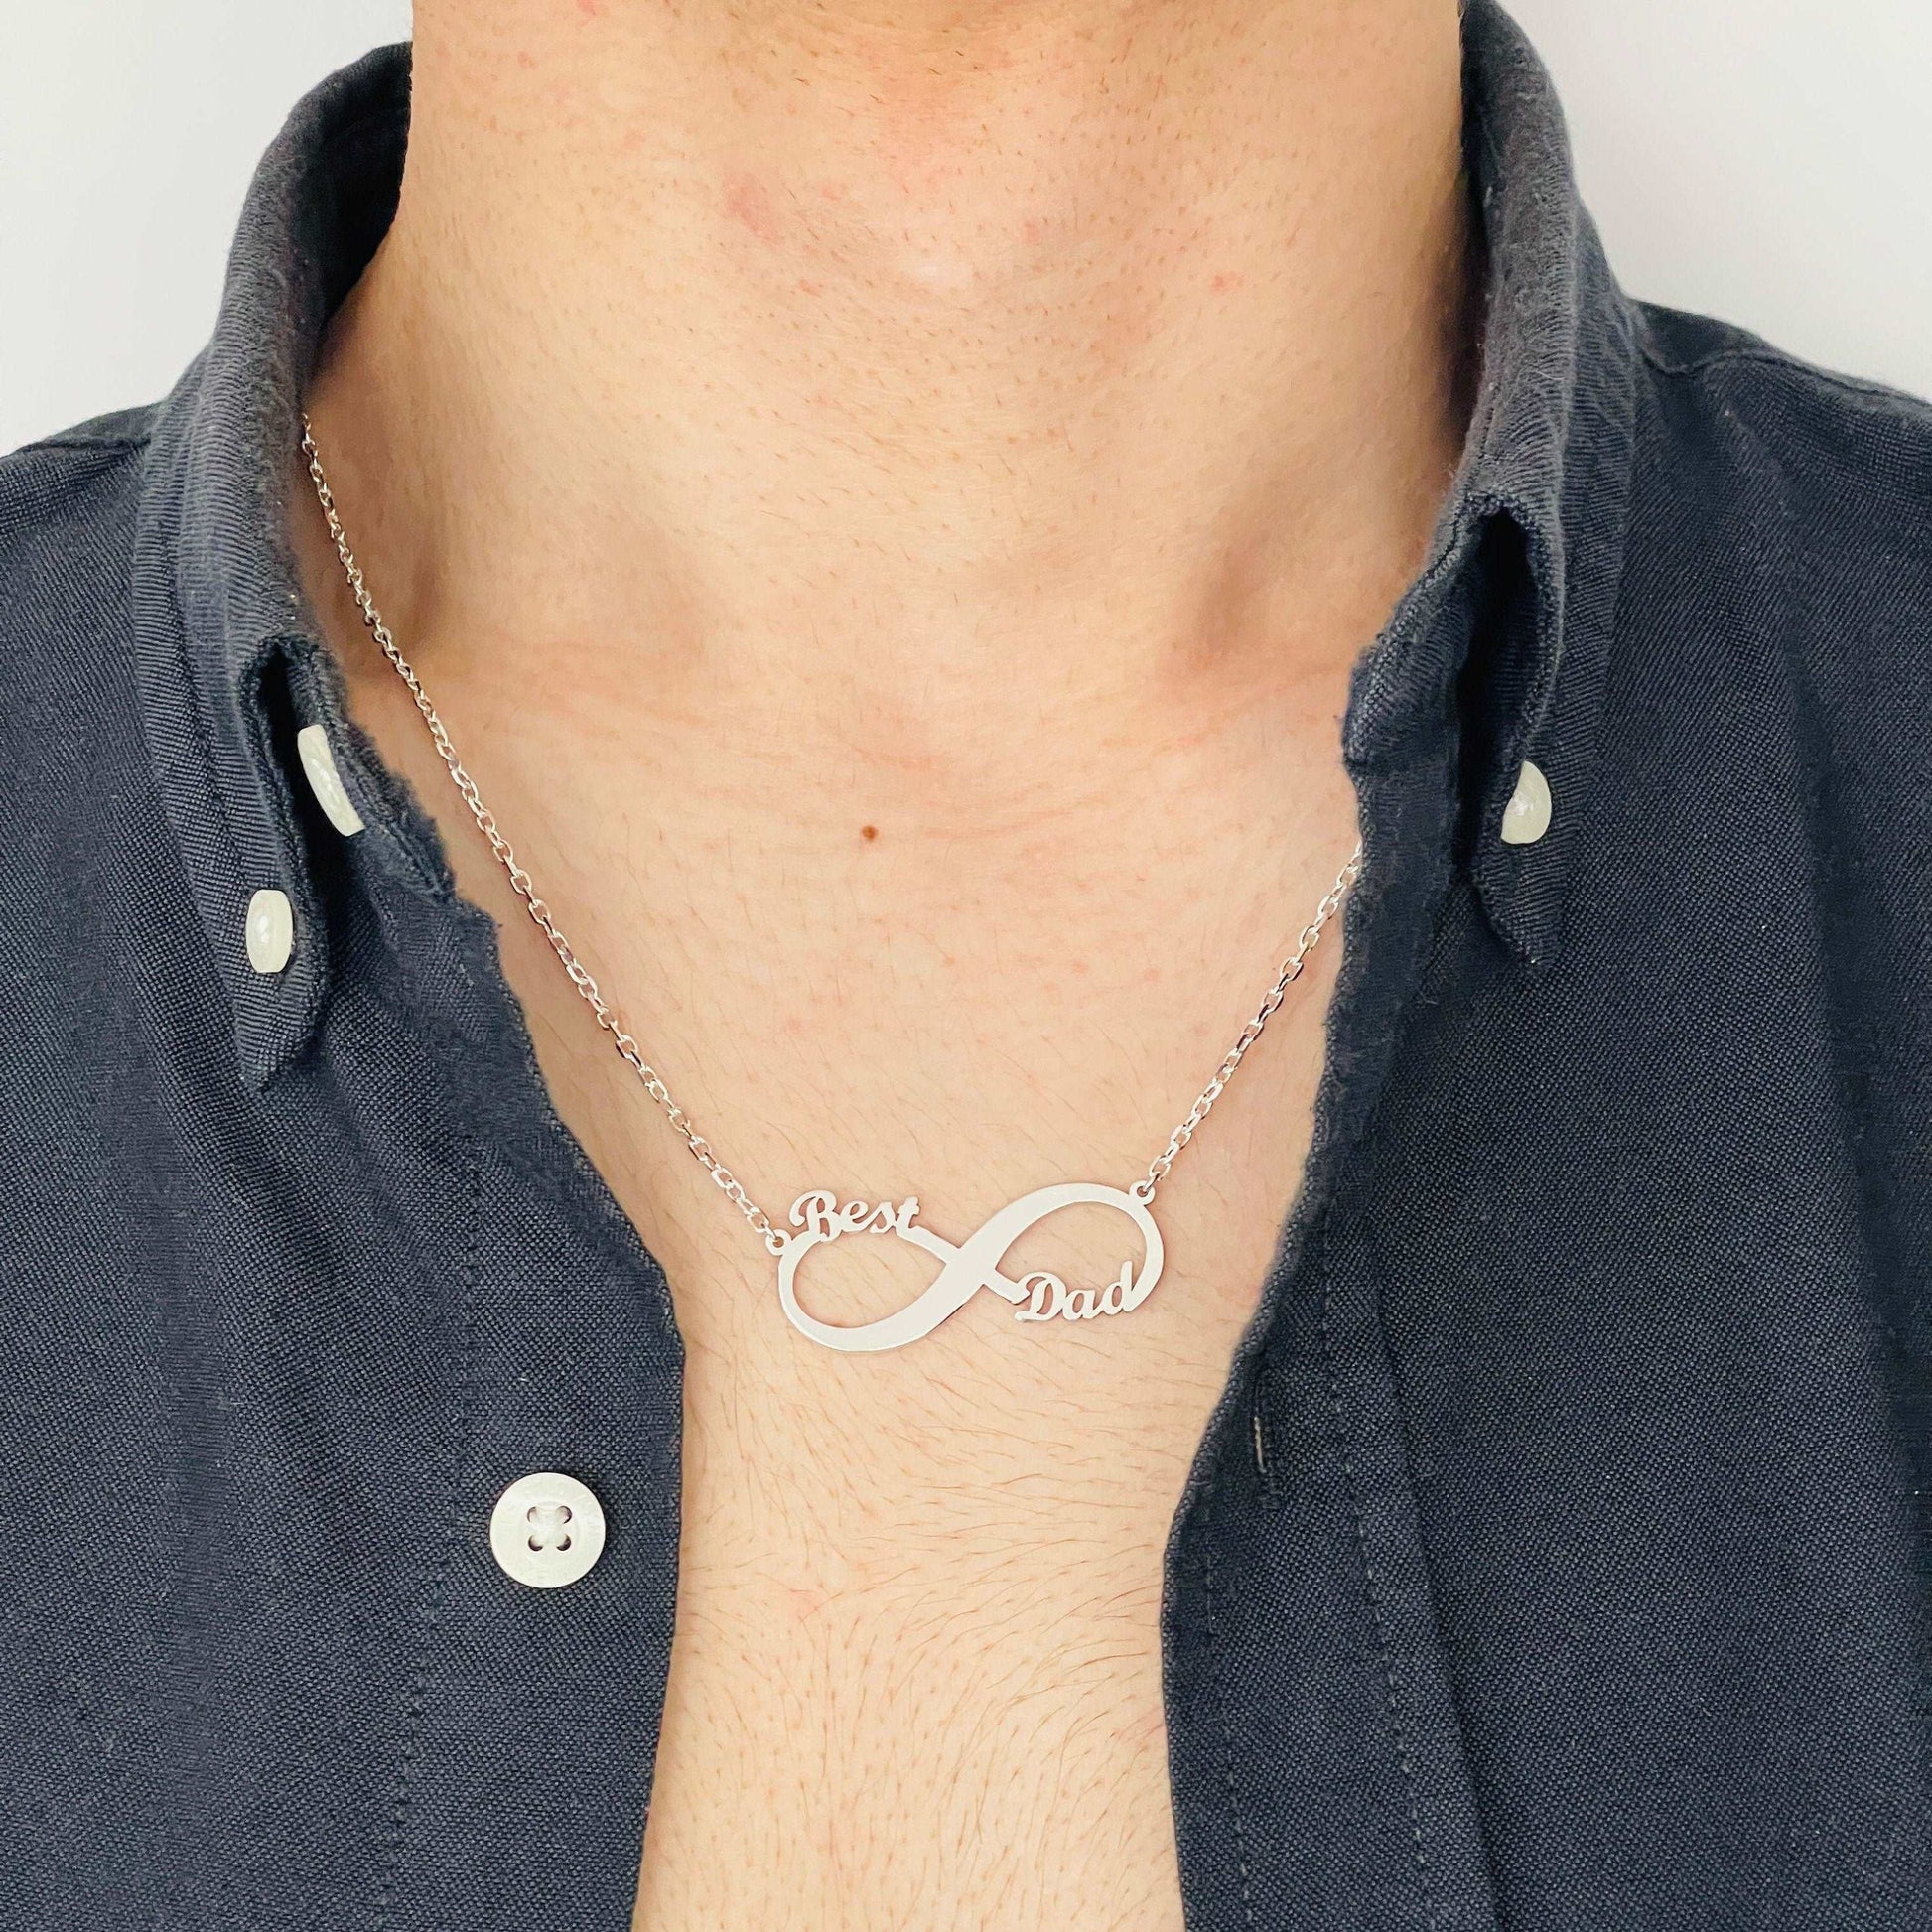 Dainty Personalized Sterling Silver Infinity Name Necklace, Men Infinity Pendant, 925 Silver Handmade Infinity Family Love Necklace sjewellery|sara jewellery shop toronto